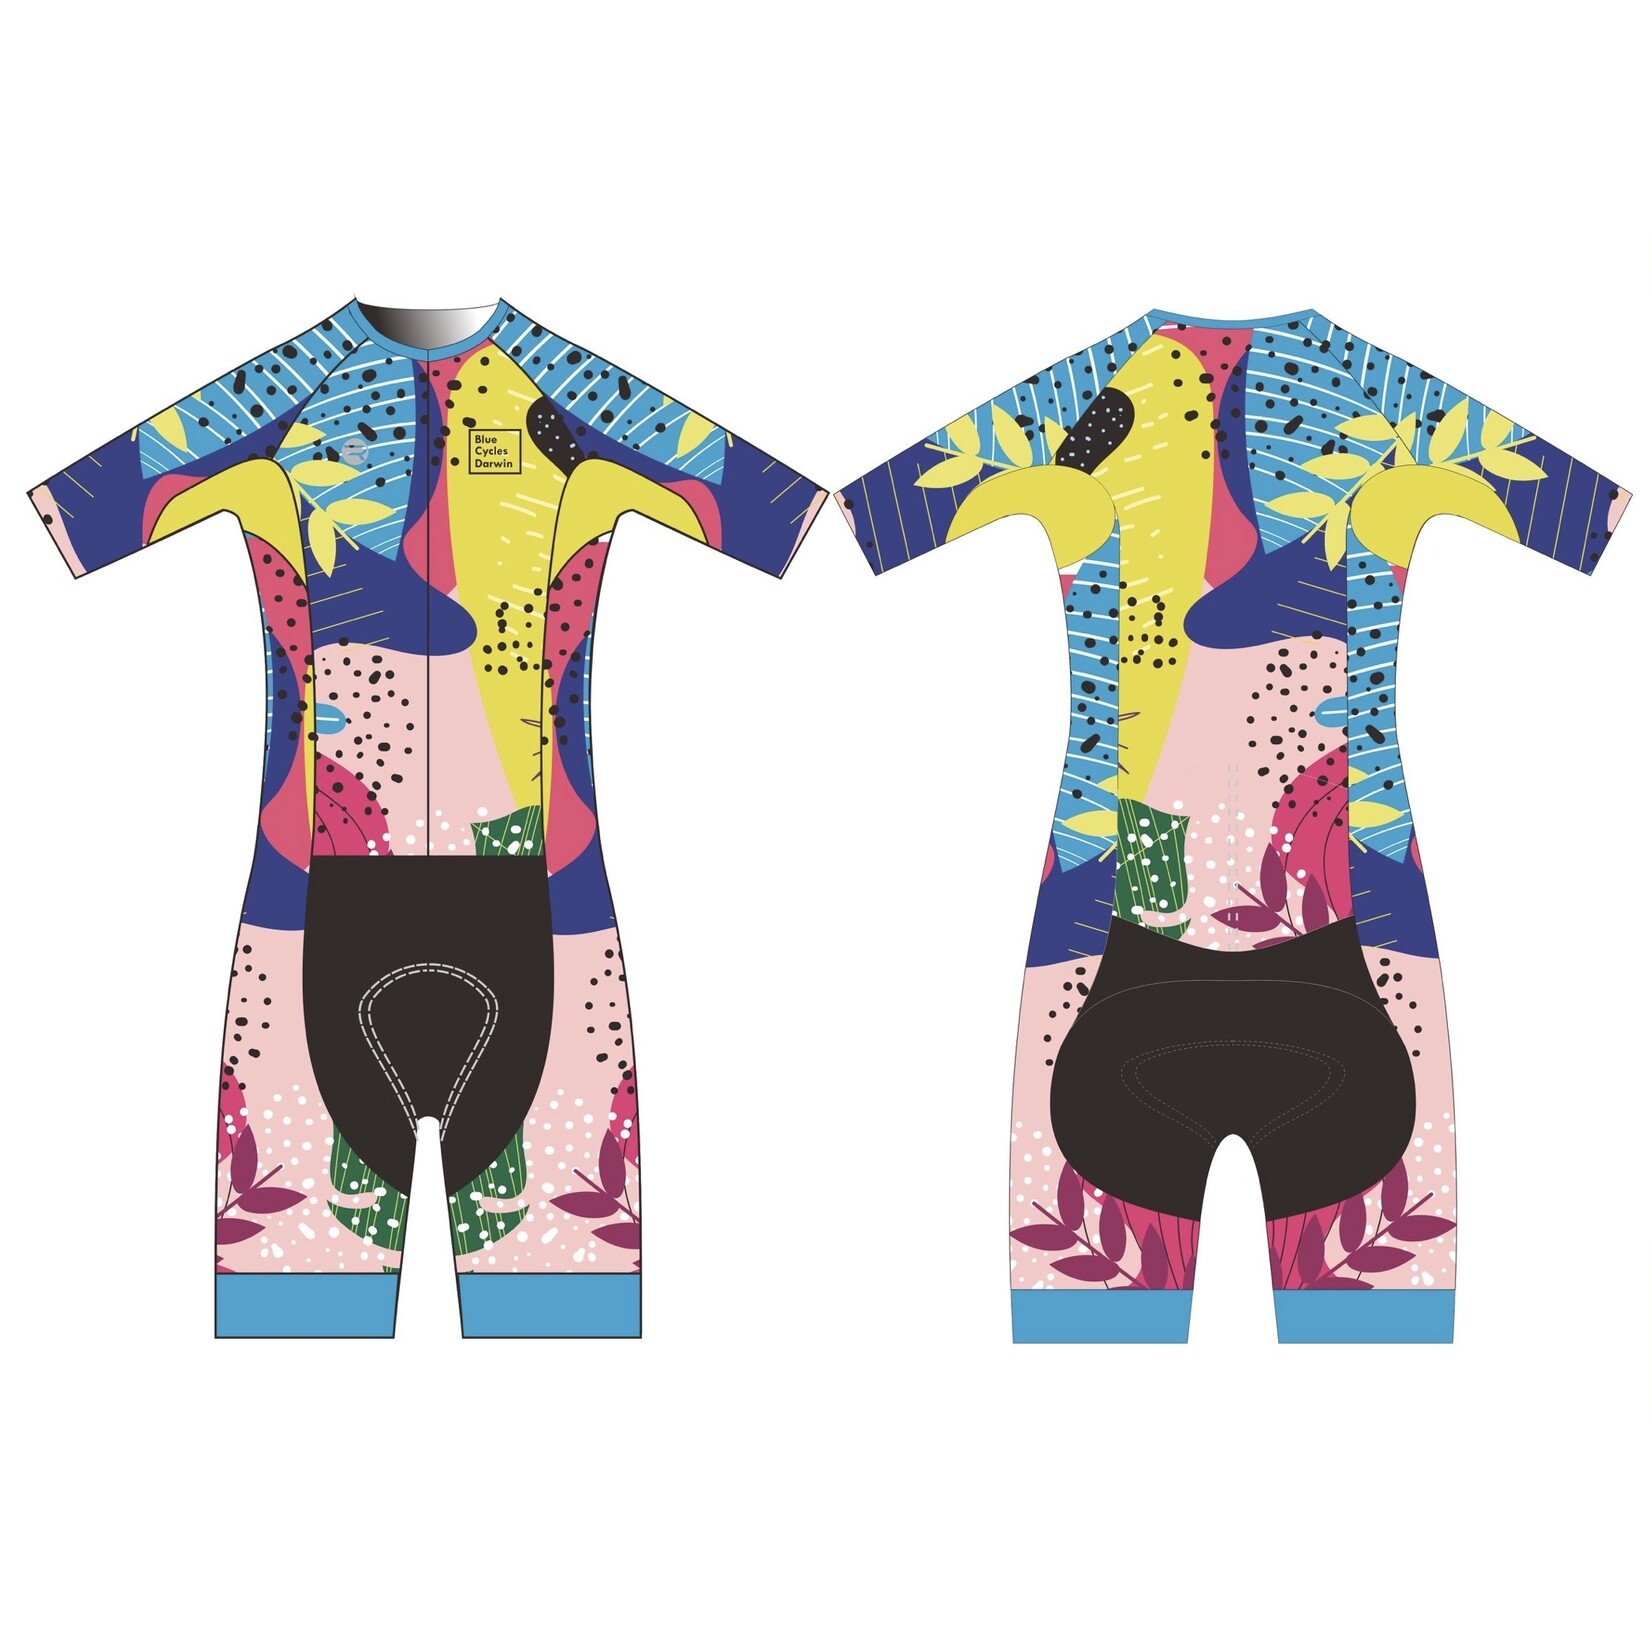 Revolution Clothing Tri Suit Half Sleeve Men's New Dawn Collection